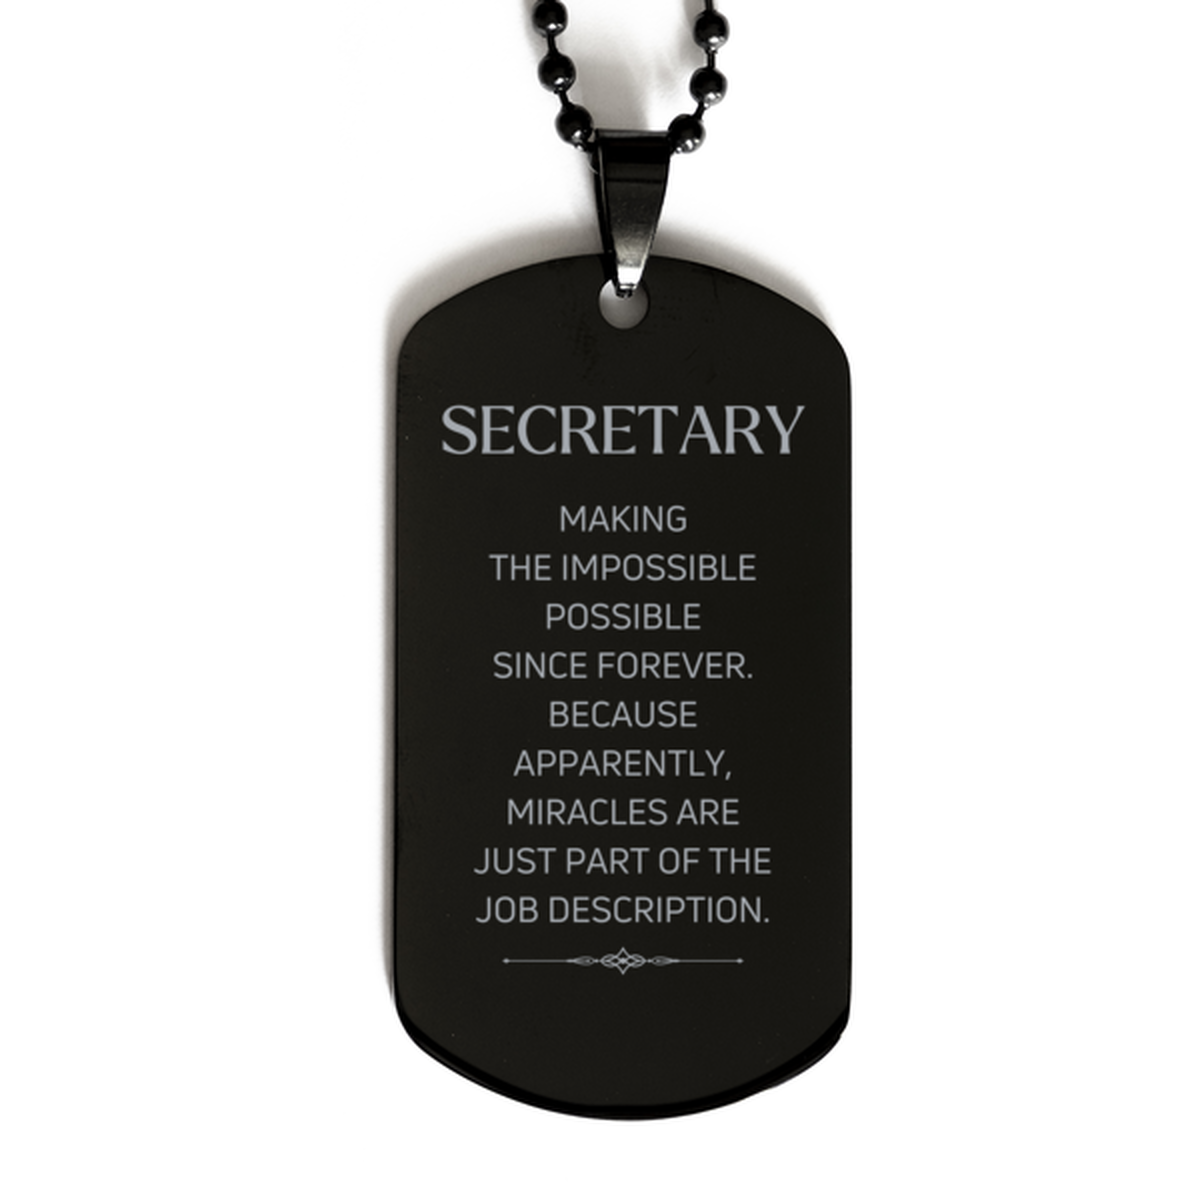 Funny Secretary Gifts, Miracles are just part of the job description, Inspirational Birthday Black Dog Tag For Secretary, Men, Women, Coworkers, Friends, Boss